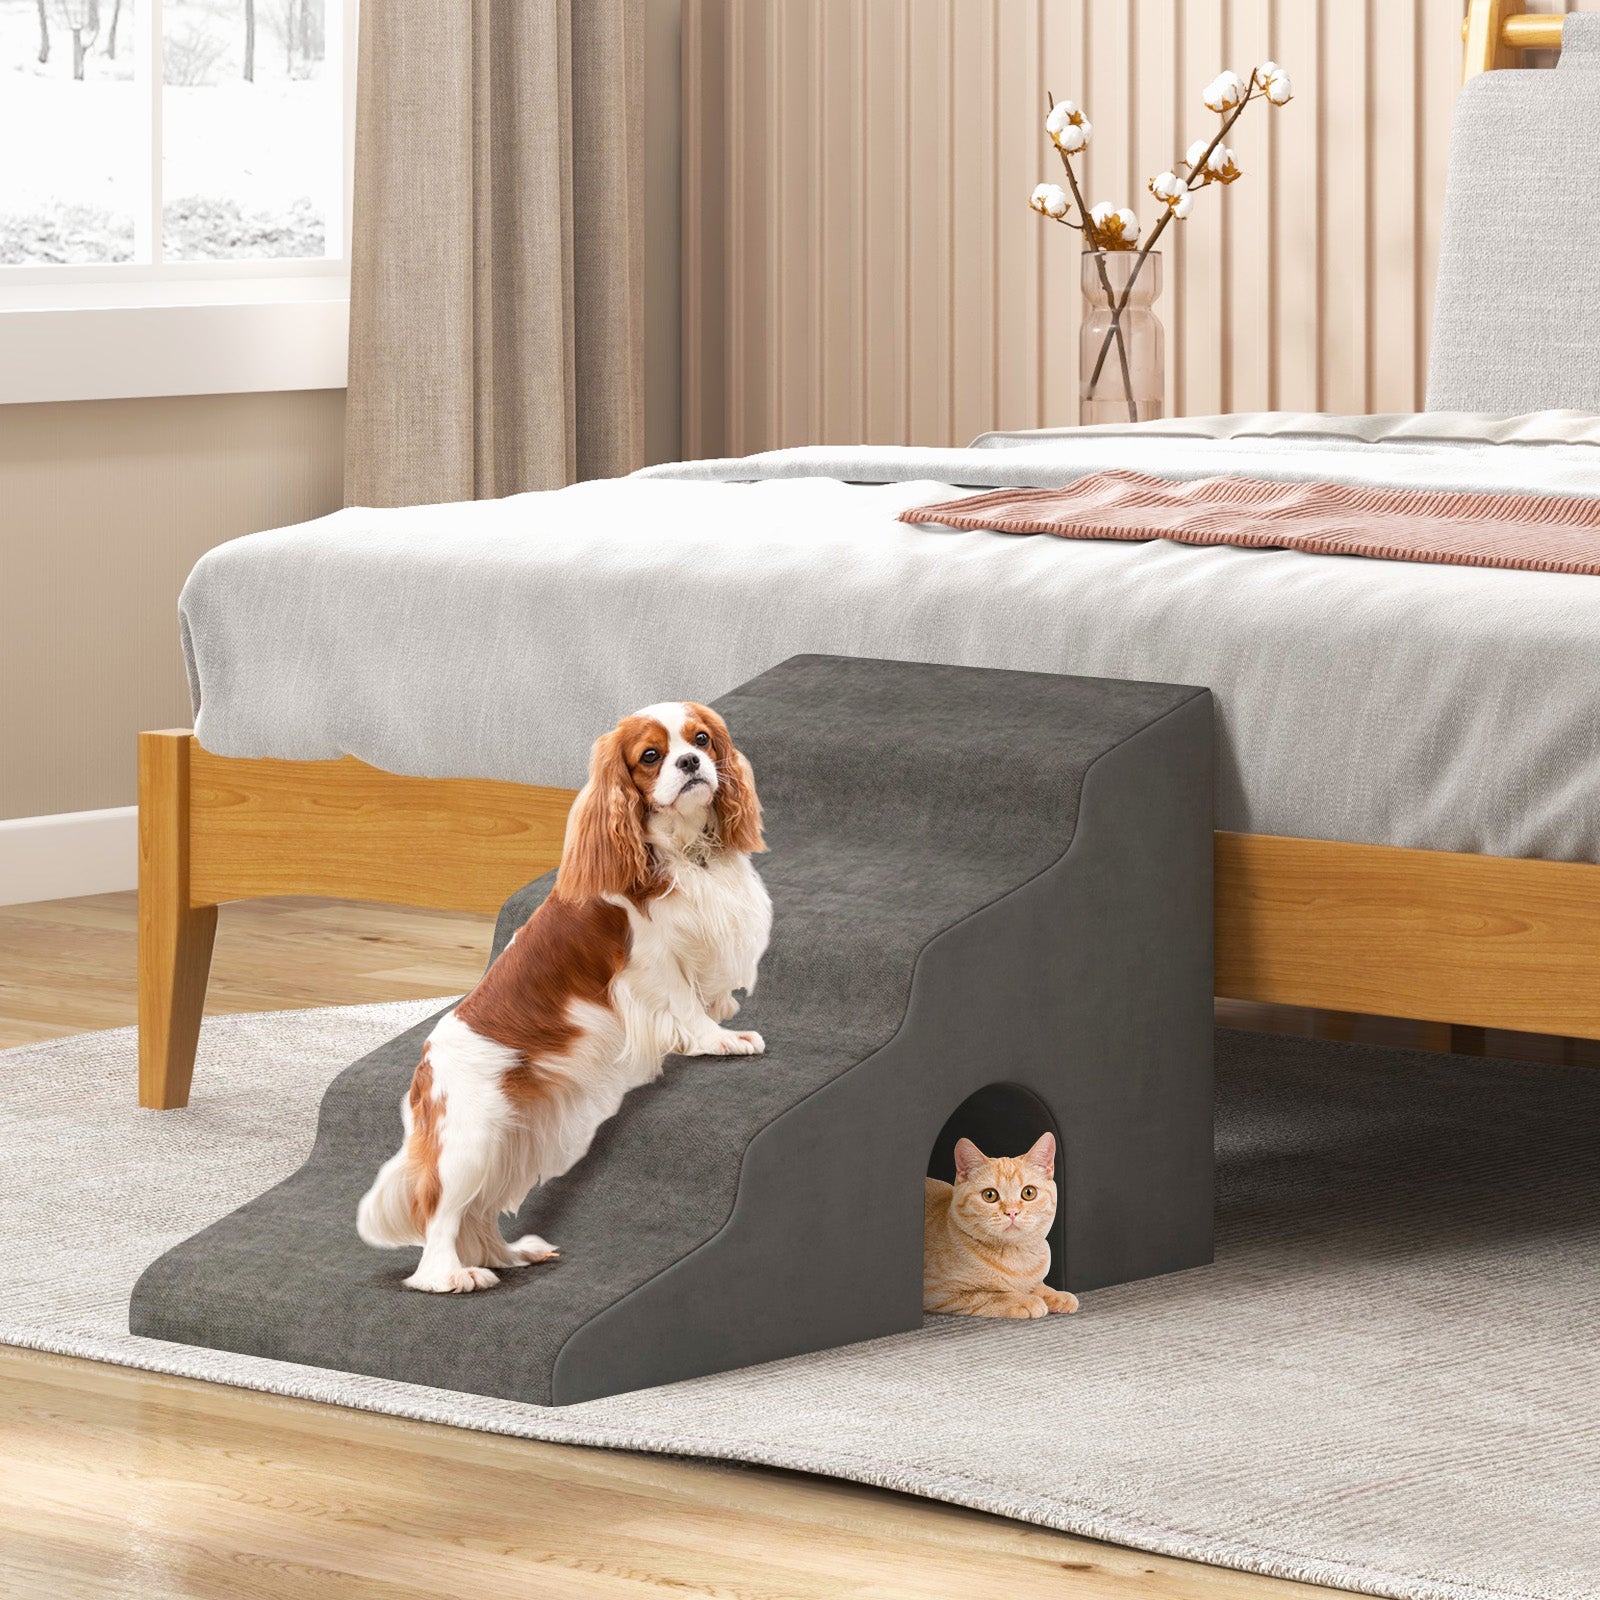 4-Tier High Density Foam Dog Ramps for High Beds and Couches-Grey